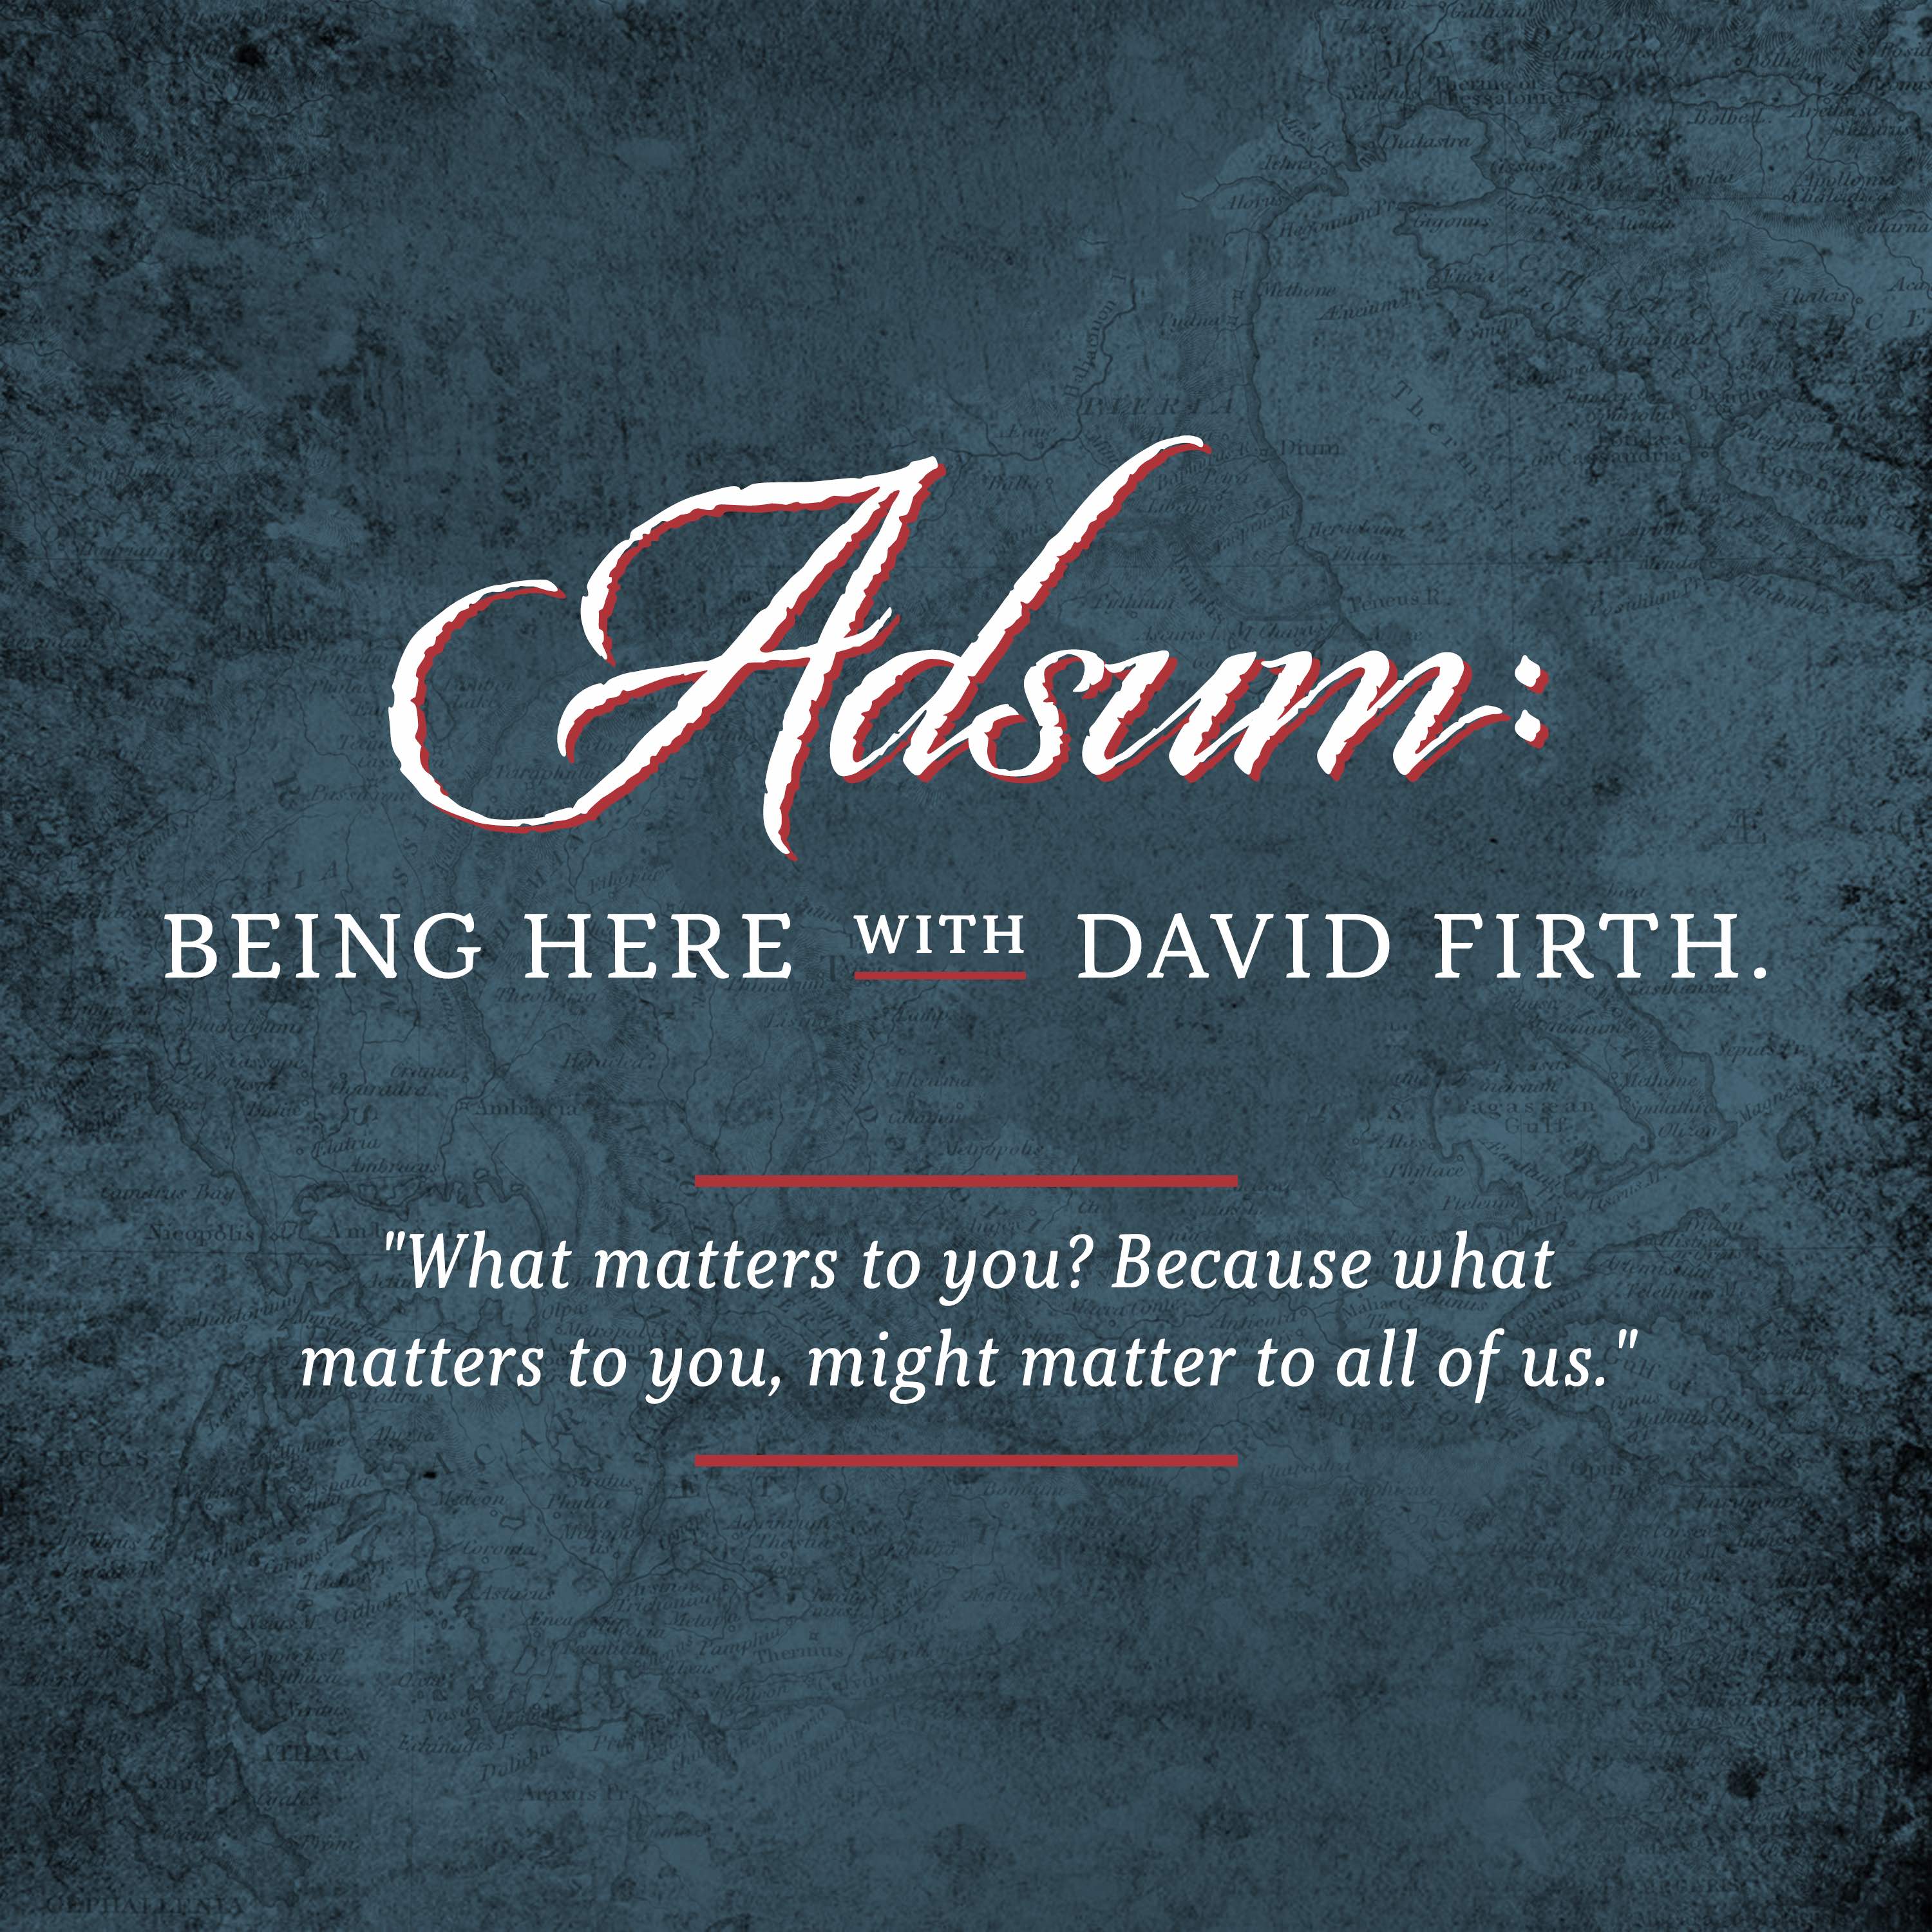 Adsum: Being Here with David Firth